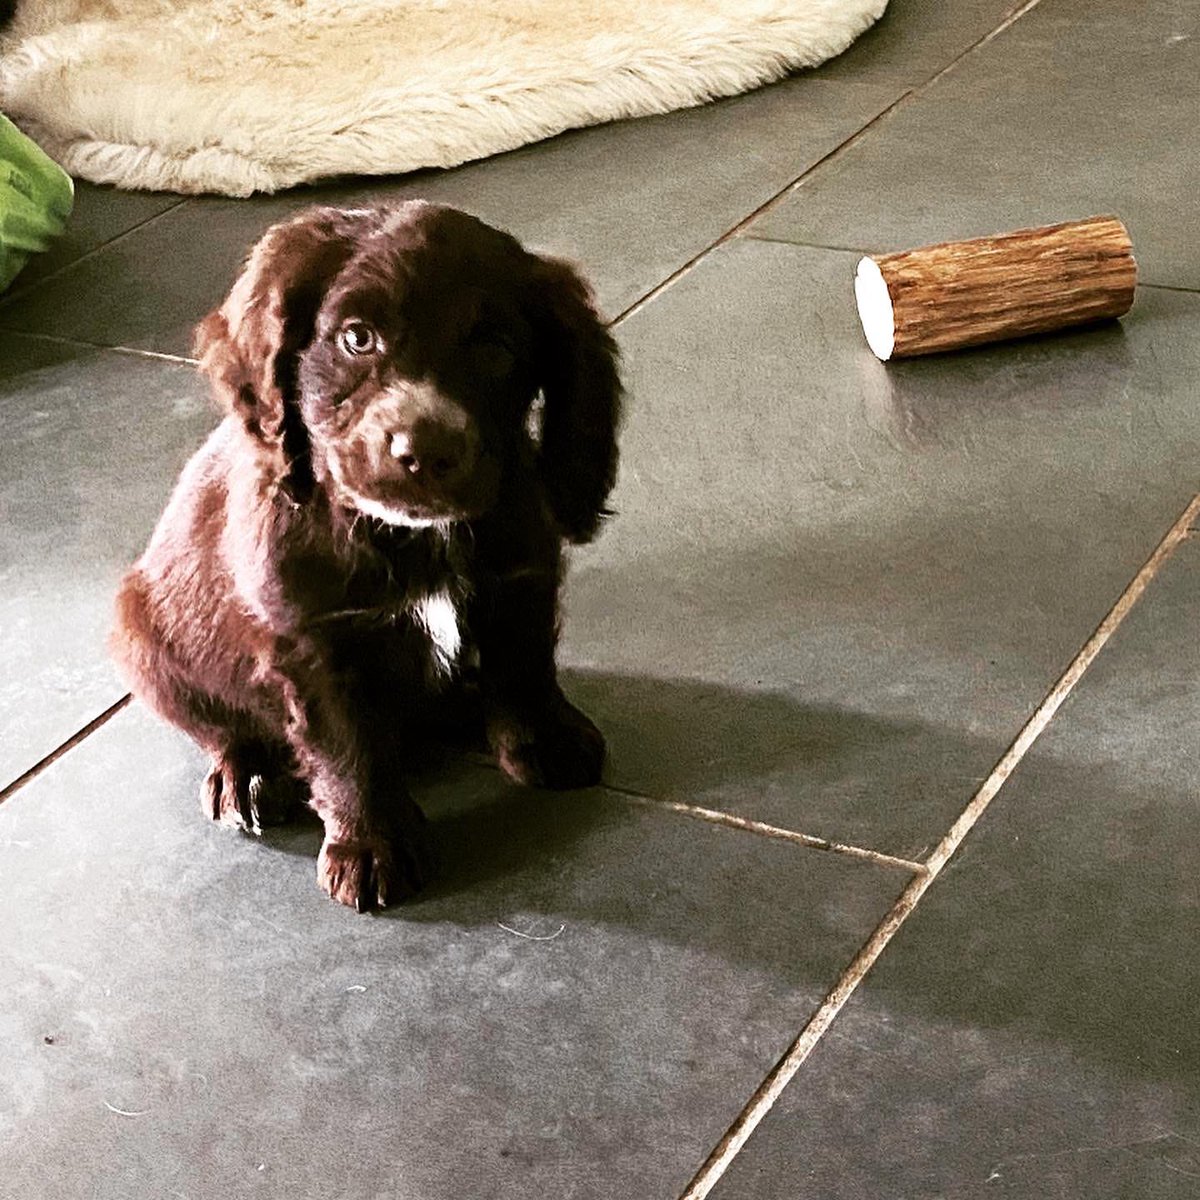 New member of the family!! Chocolate cocker spaniel Ozzy 😍 keeping me busy 😃 #ozzy #dog #dogs #puppy #doggo #cockerspaniel #chocolate #live #love #laugh #best #life #music #producer #artist #singersongwriter #musician #dj #housemusic #melodichouse #london #ny #la #surrey